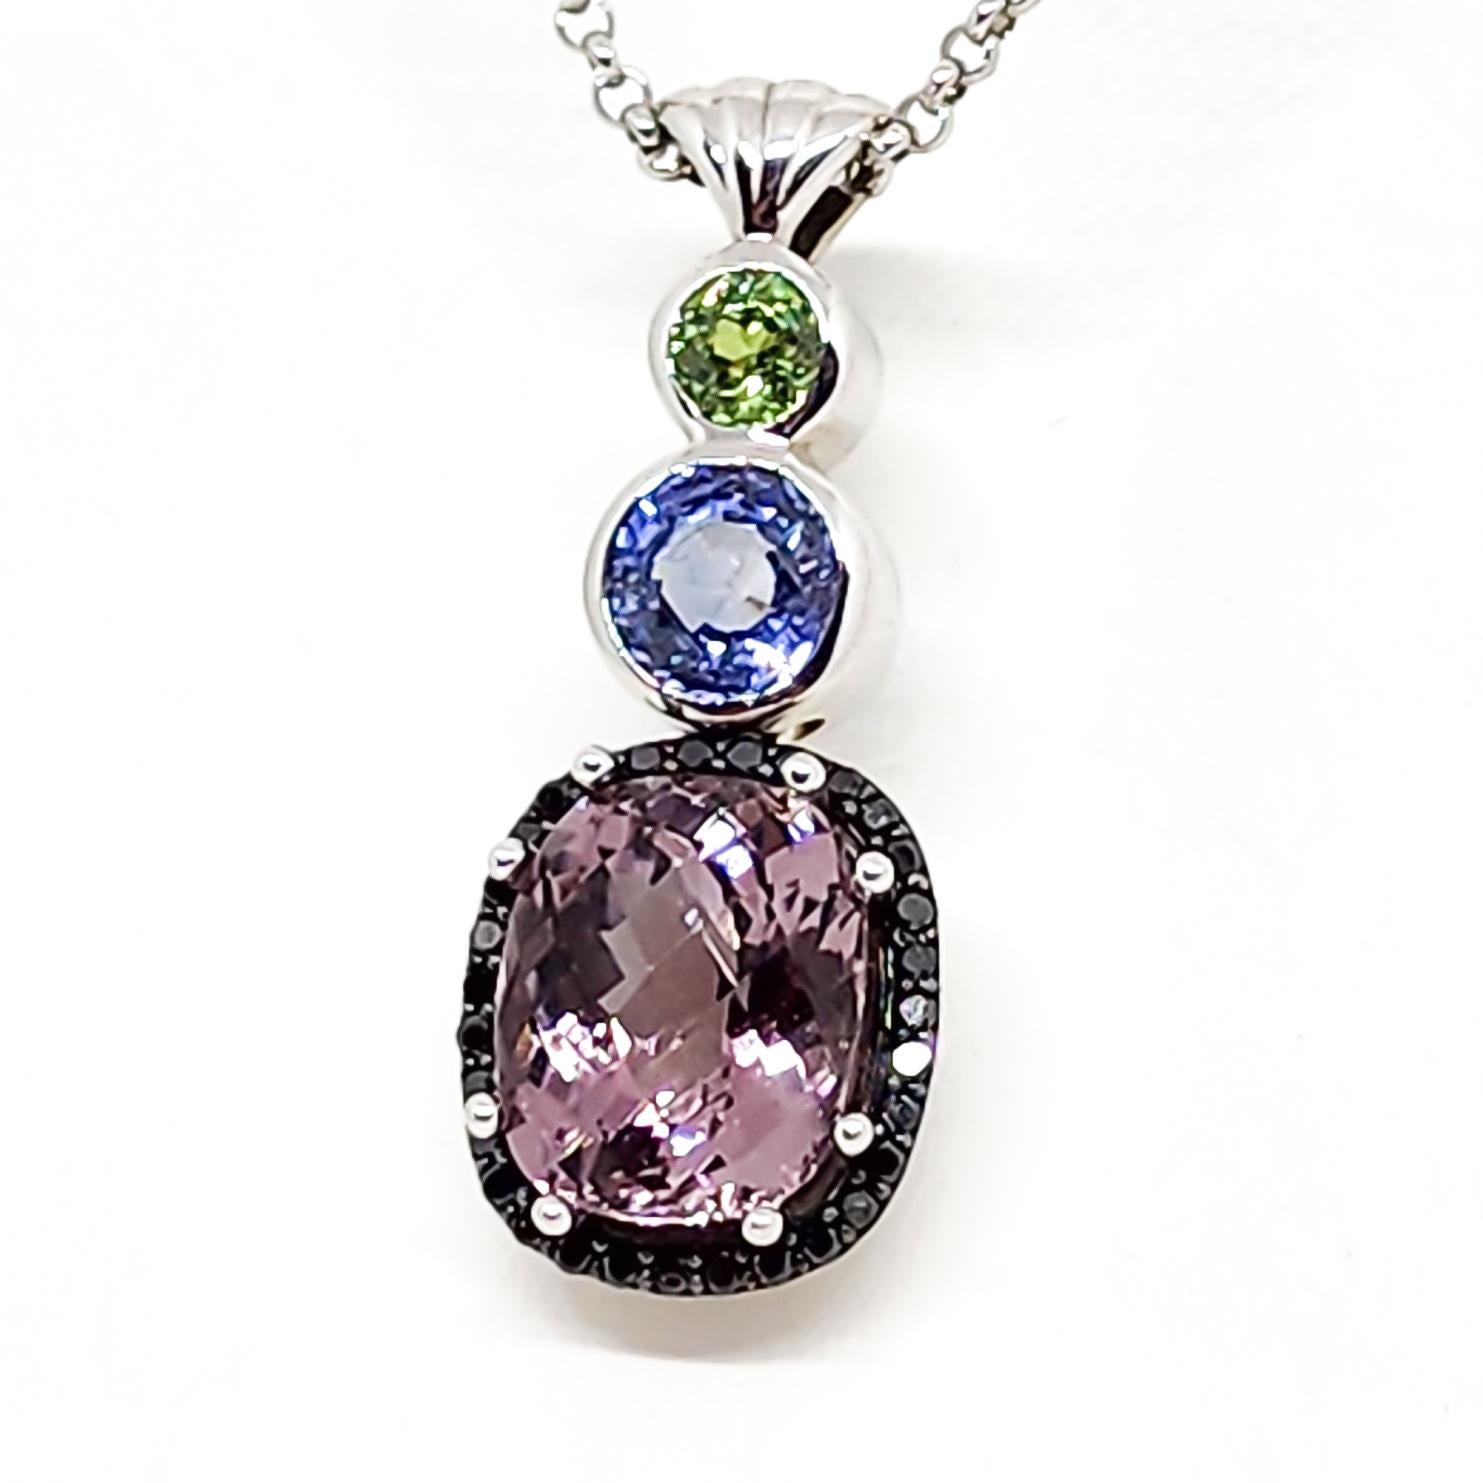 This Custom Designed and Crafted, Drop Pendant Necklace by Artisan Tom Castor features an exceptional Palette of Color with Cool Winter hues and Sparkle. 
The Central focus of the Pendant drop is a Checkerboard Faceted, Cushion Shape, Natural